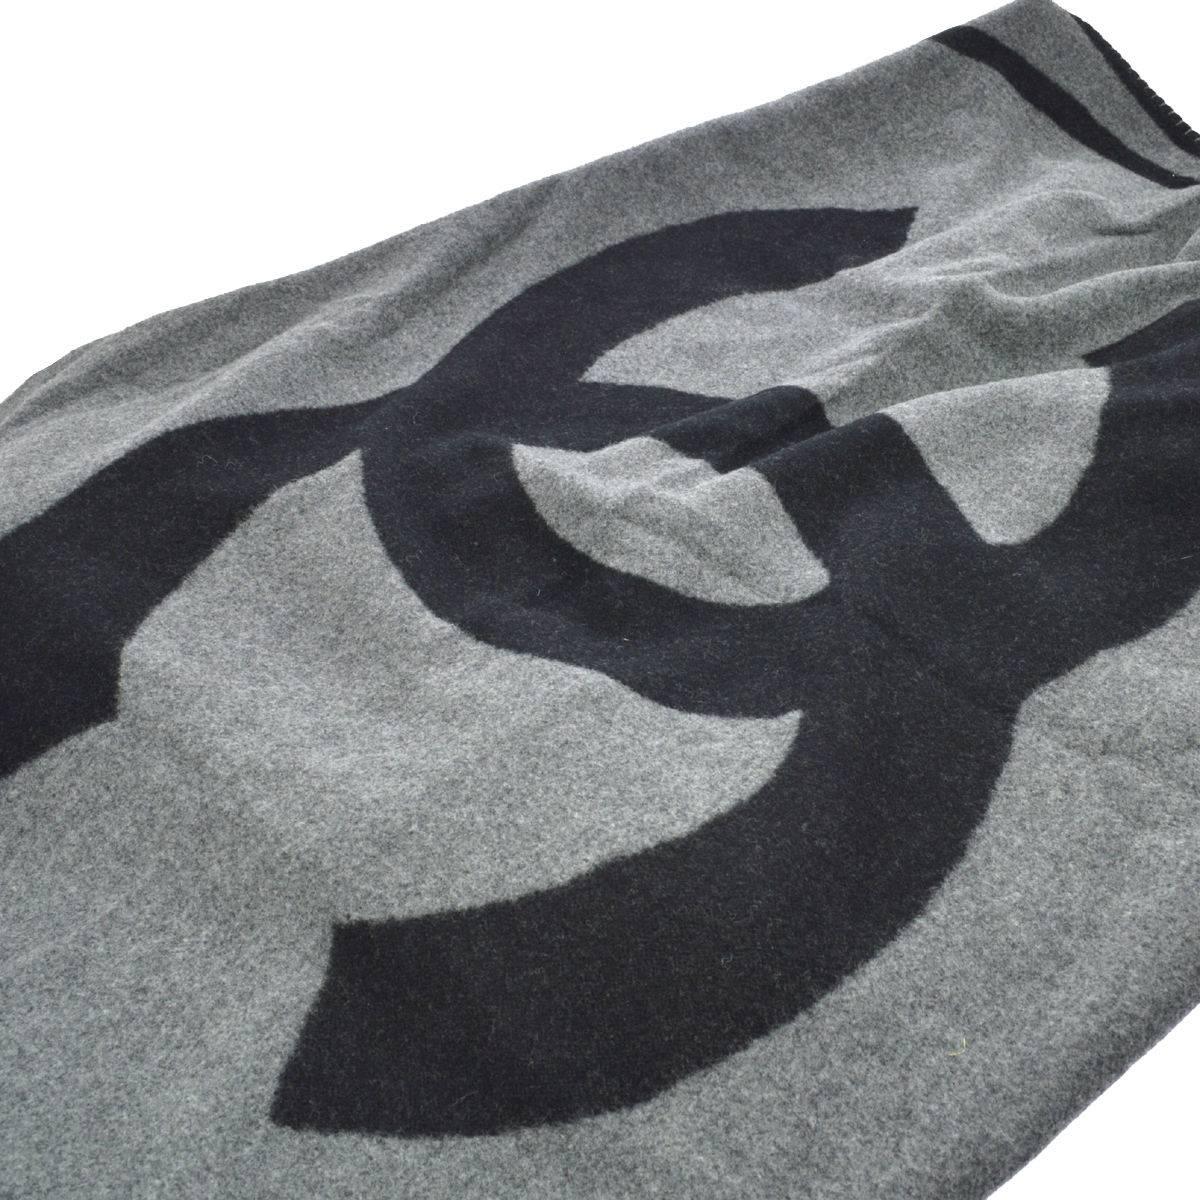 CURATOR'S NOTES

Chanel Black Gray Wool Decor Men's Women's Throw Blanket in Dust Bag Cover  

Wool
Cashmere
Made in Scotland
Measures 54" W x 70" H
Includes original Chanel dust bag protective cover